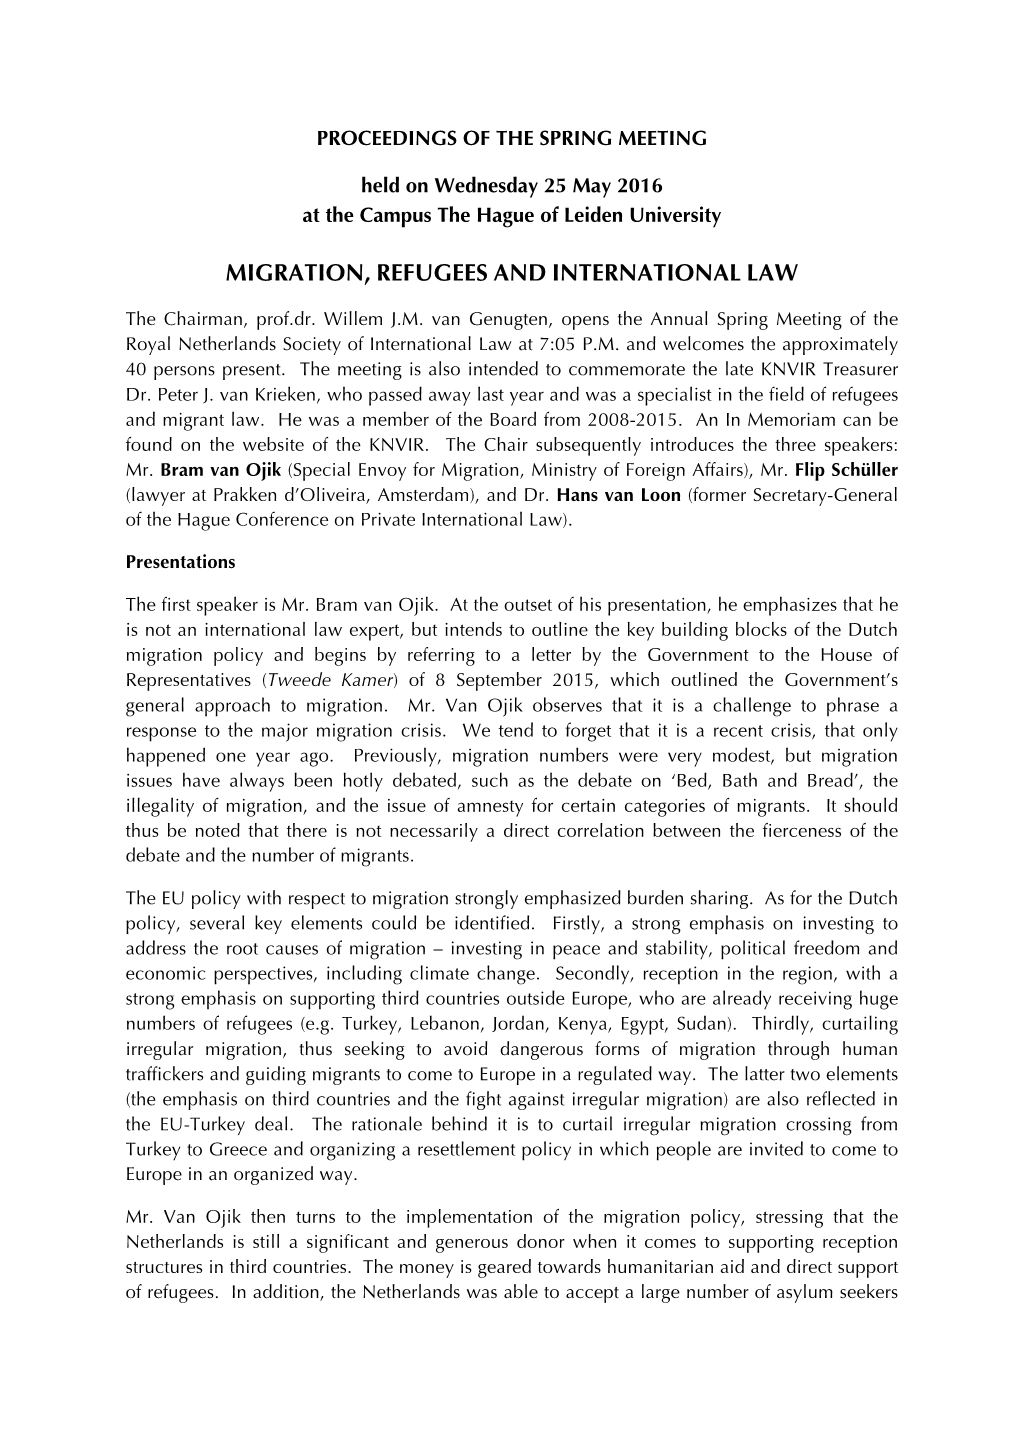 Migration, Refugees and International Law